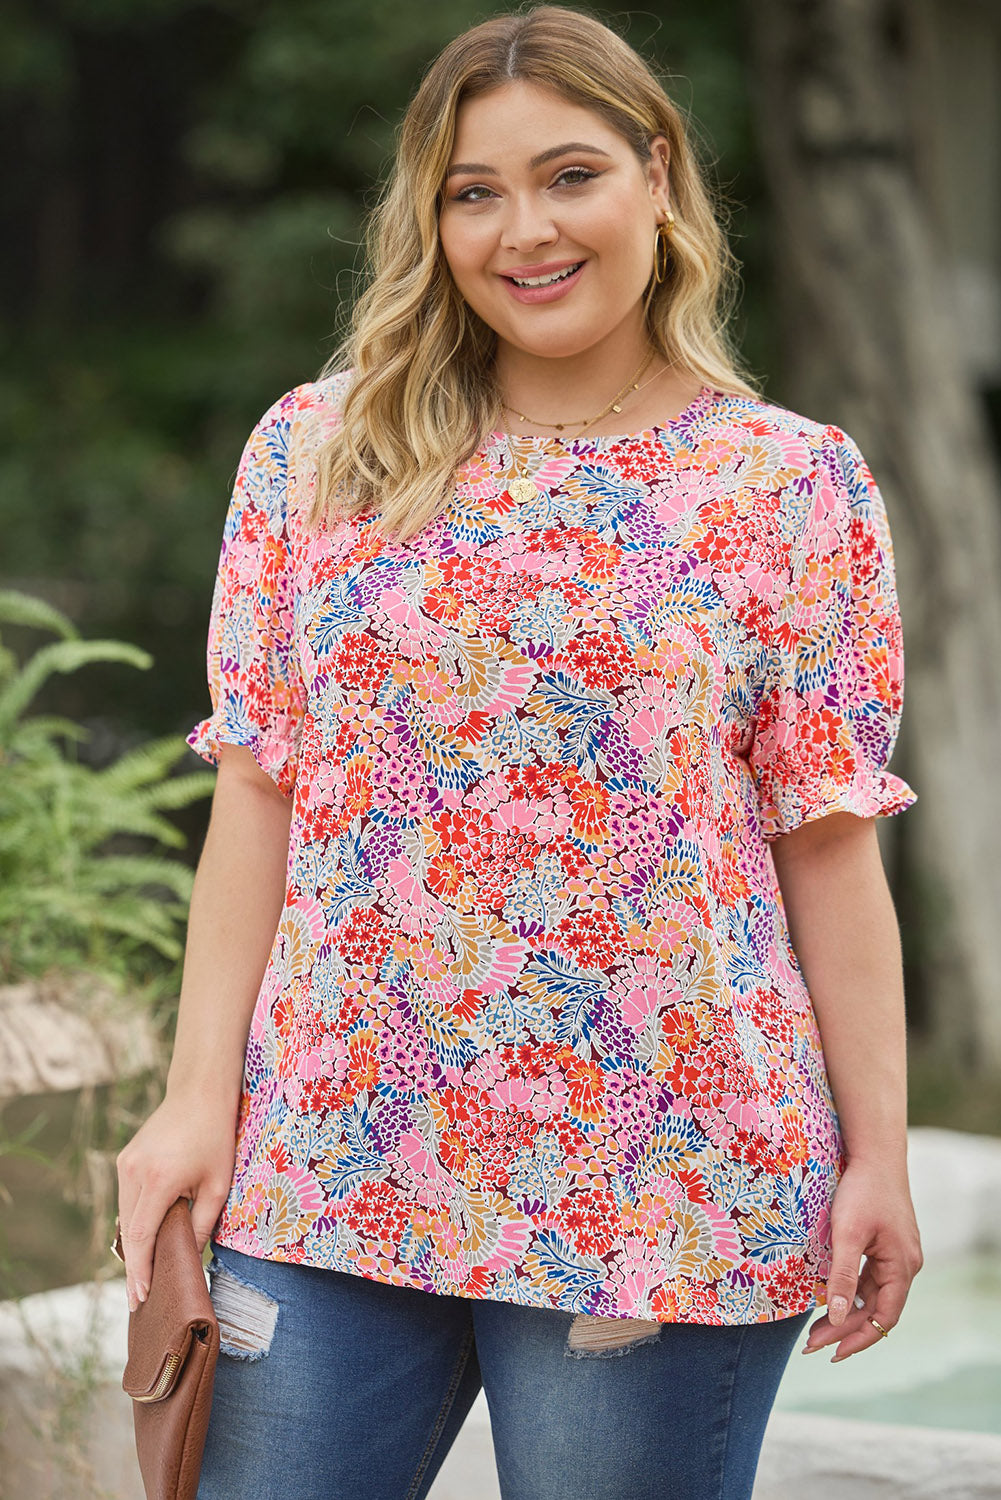 Detailed view of the beautiful floral design on a summer-ready, versatile women's top